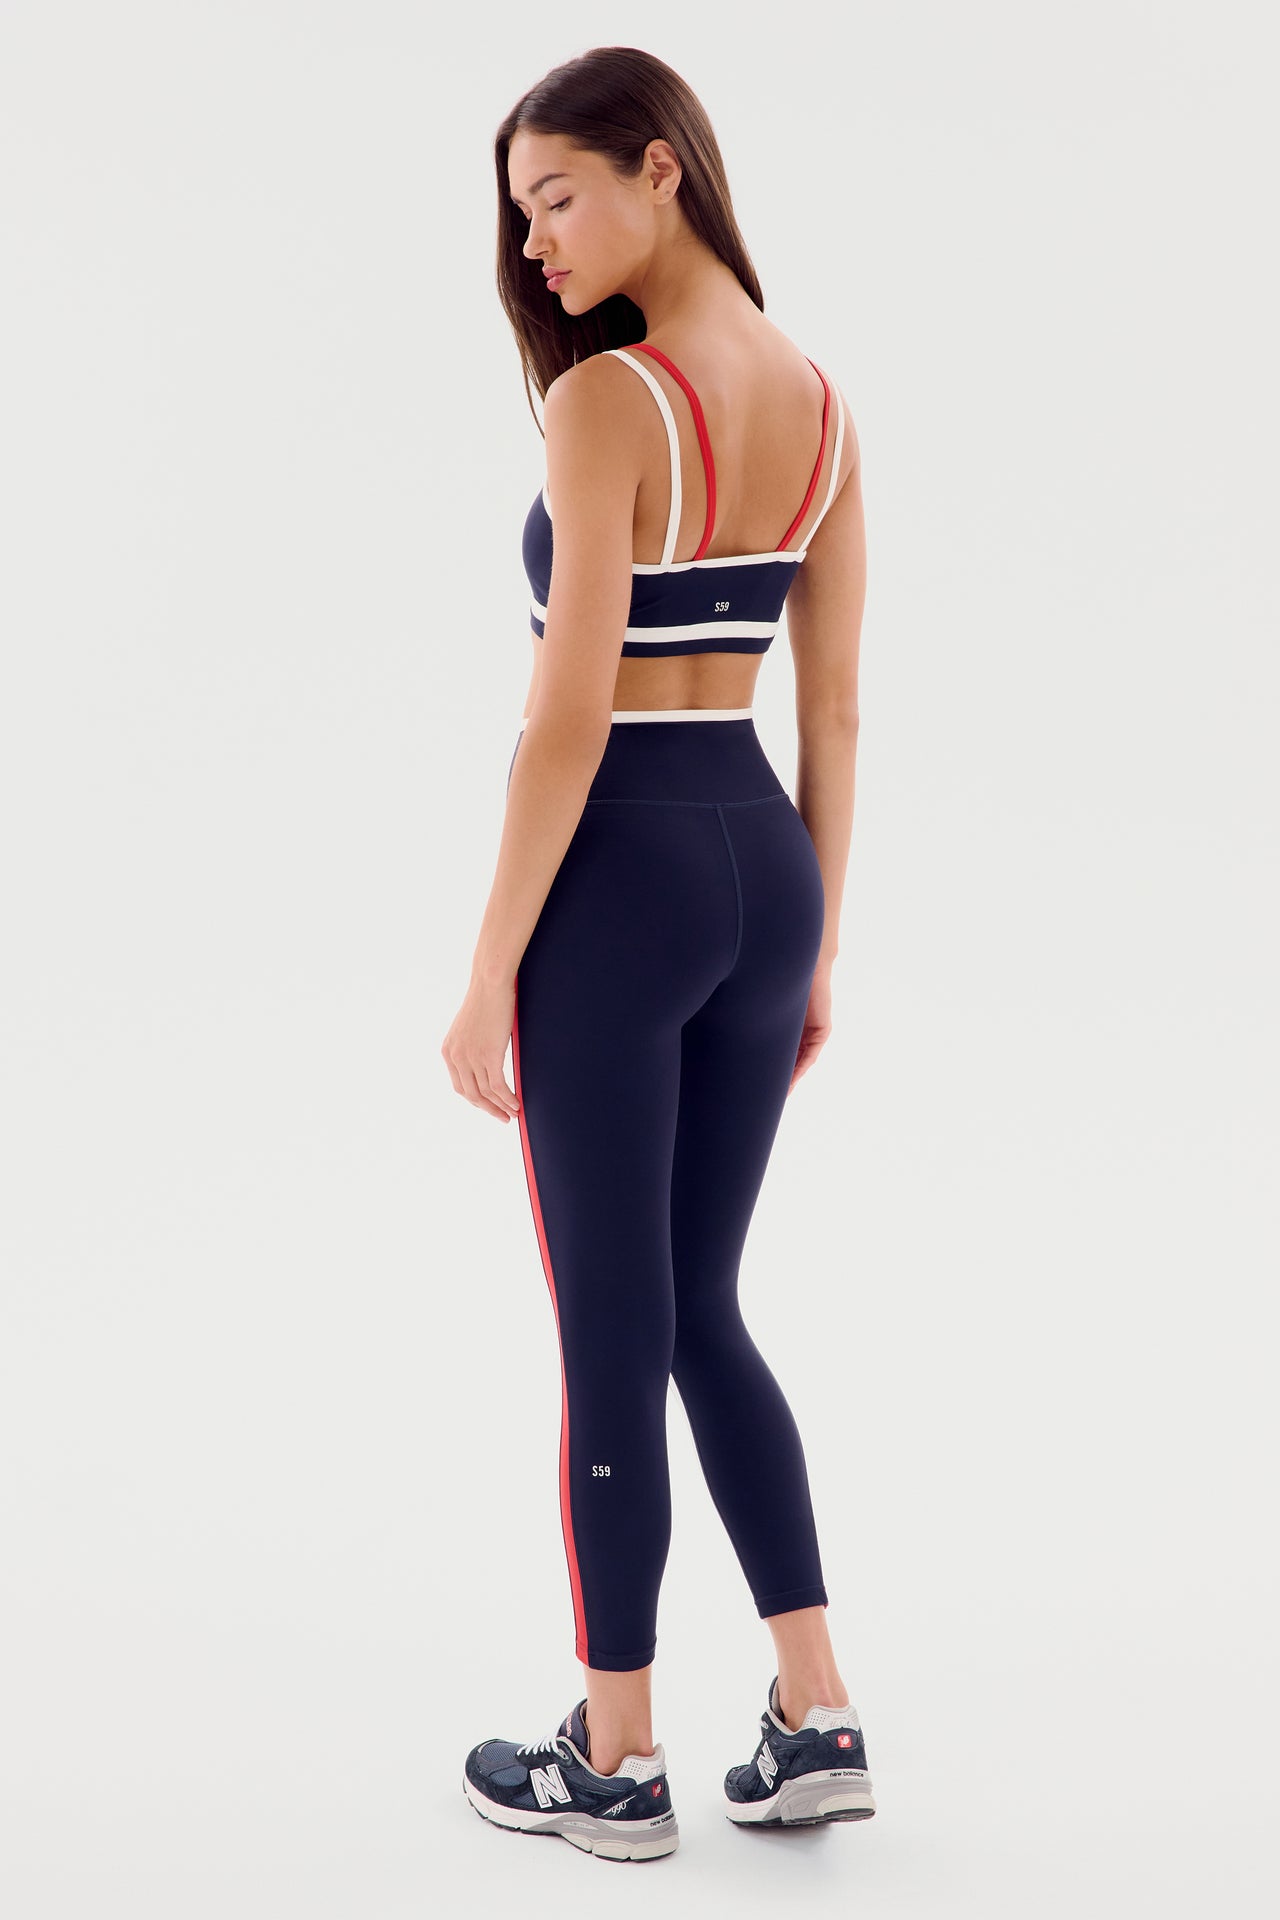 A woman is standing in profile wearing a navy blue sports bra and the Sam High Waist Rigor 7/8 - Indigo/White by SPLITS59, which feature high-waist leggings with red stripes made from rigor fabric. She completes her athletic look with black and white athletic shoes.